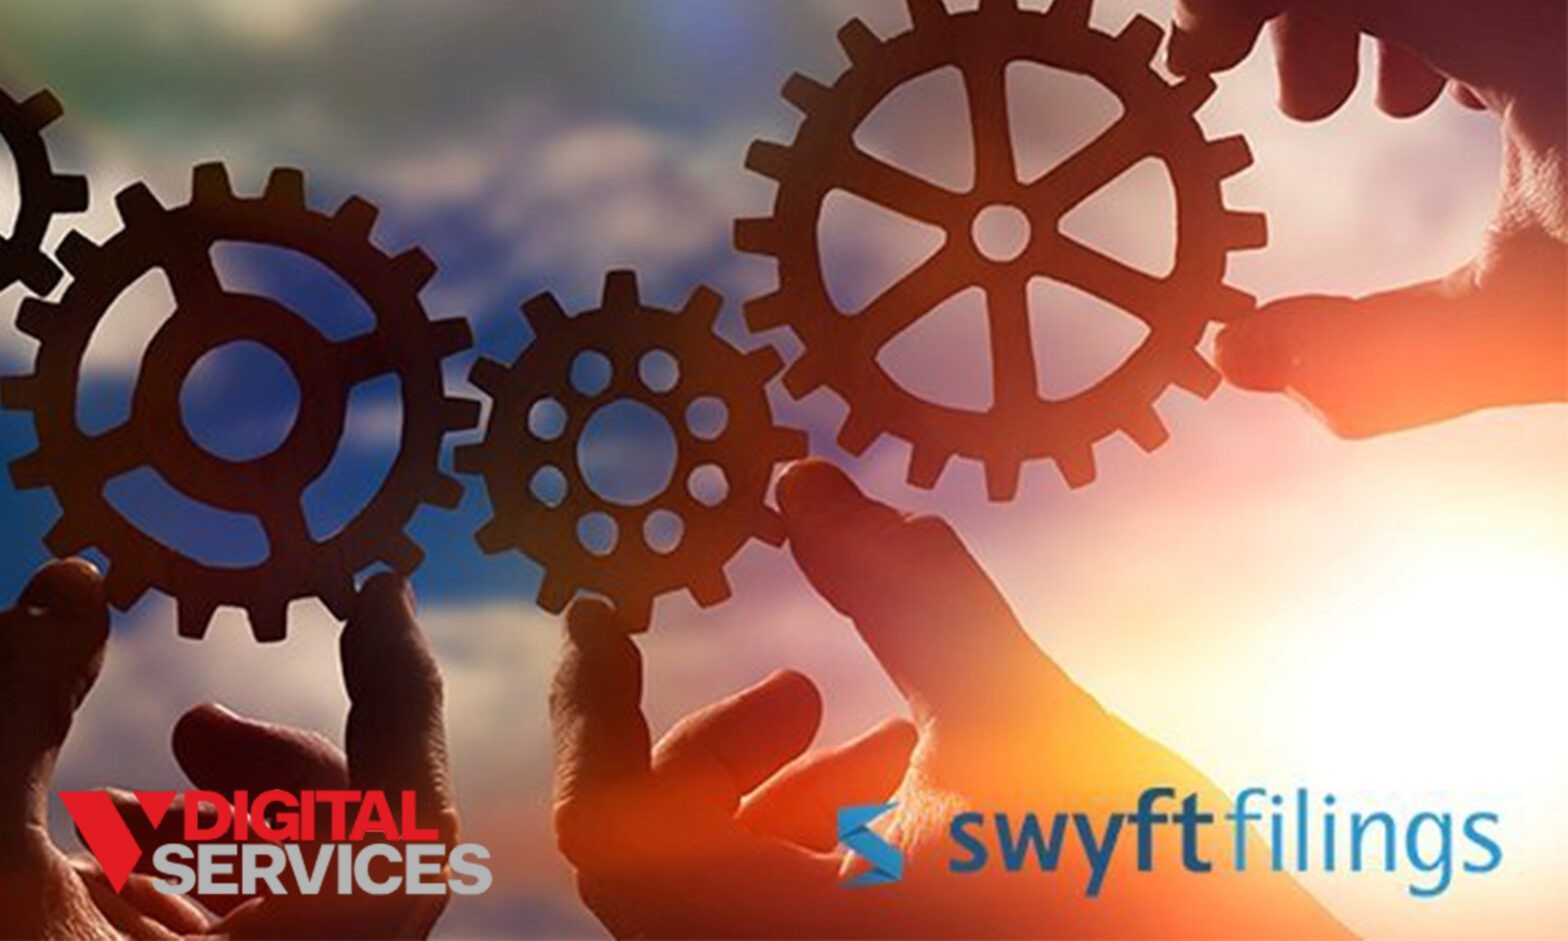 Featured image for post: V Digital Services Partners with Swify Filings to Boost Business Value